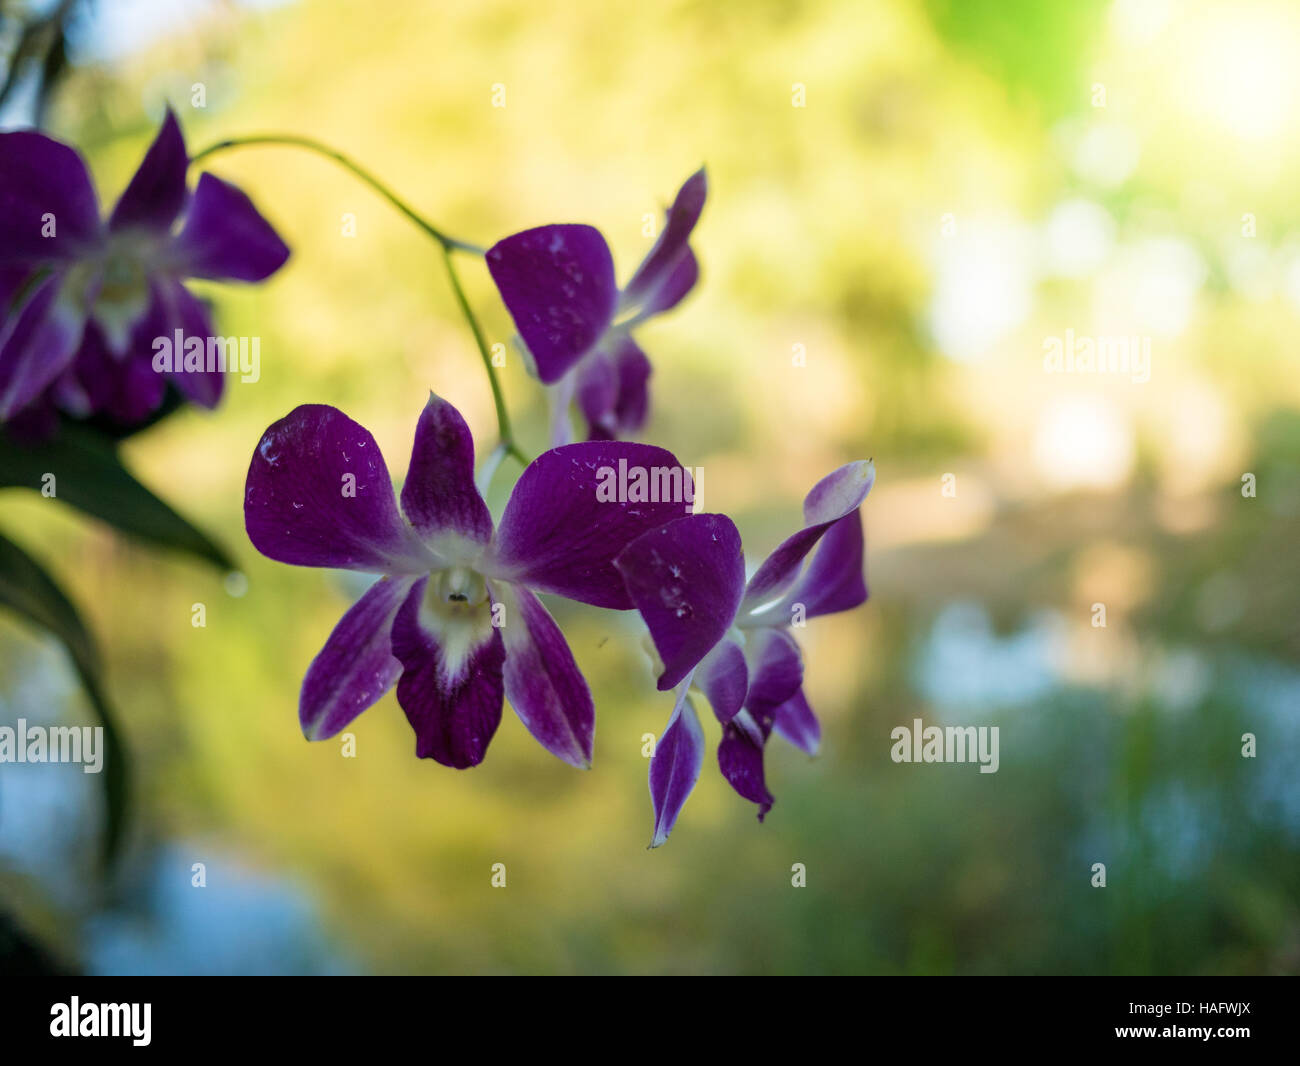 beautiful purple dendrobium orchid flowers in a tree Stock Photo